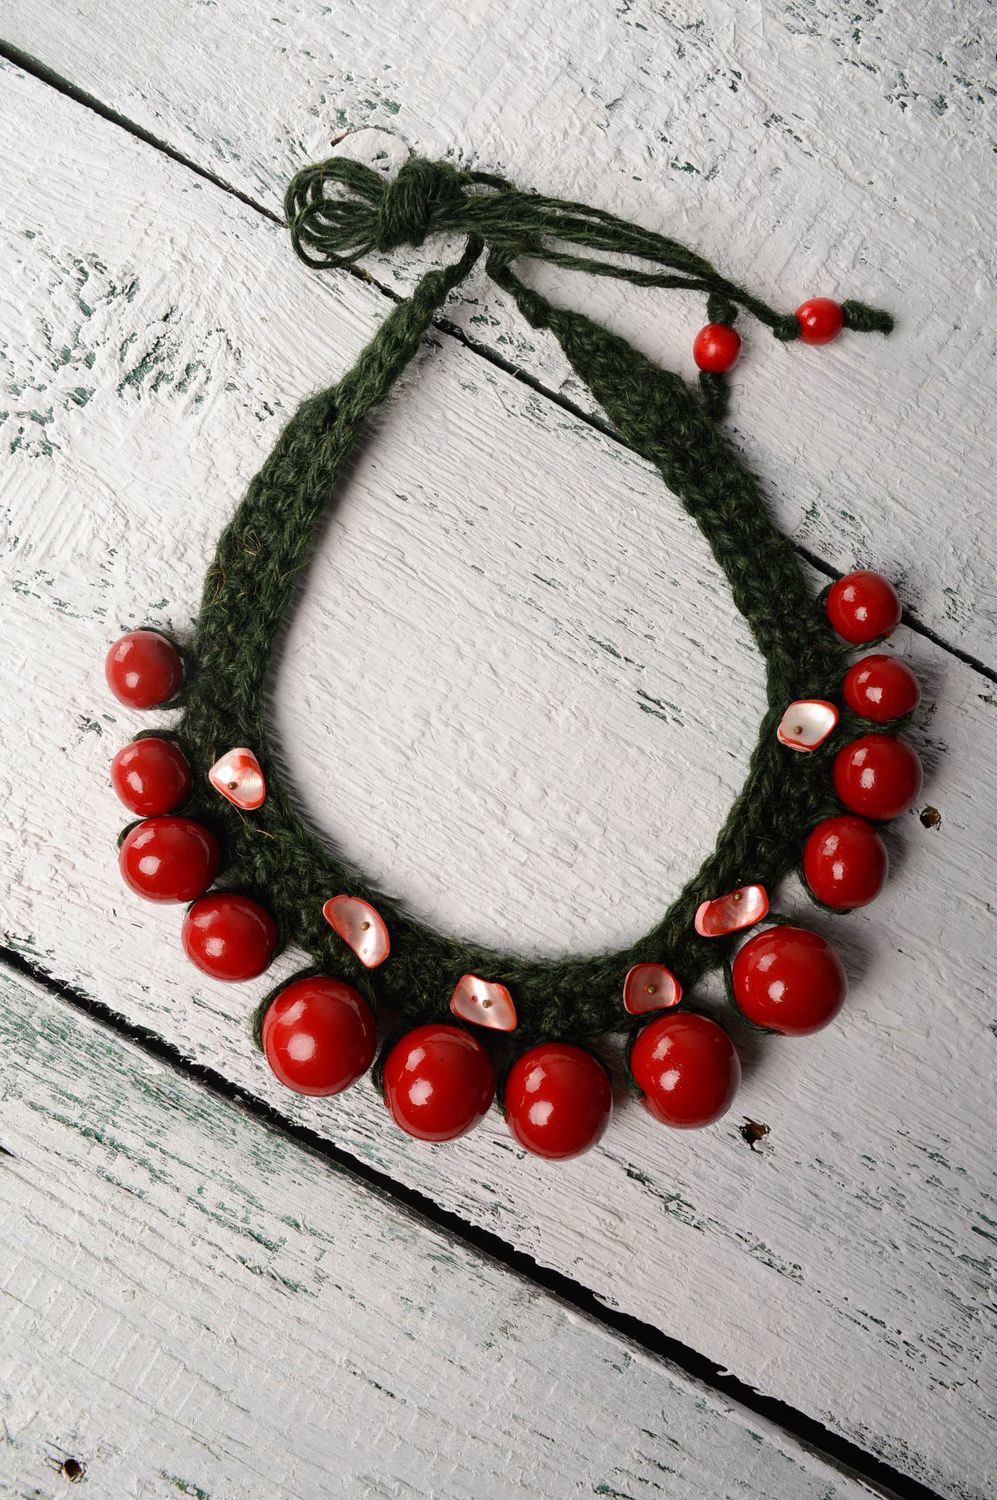 Crochet necklace in eco style photo 1